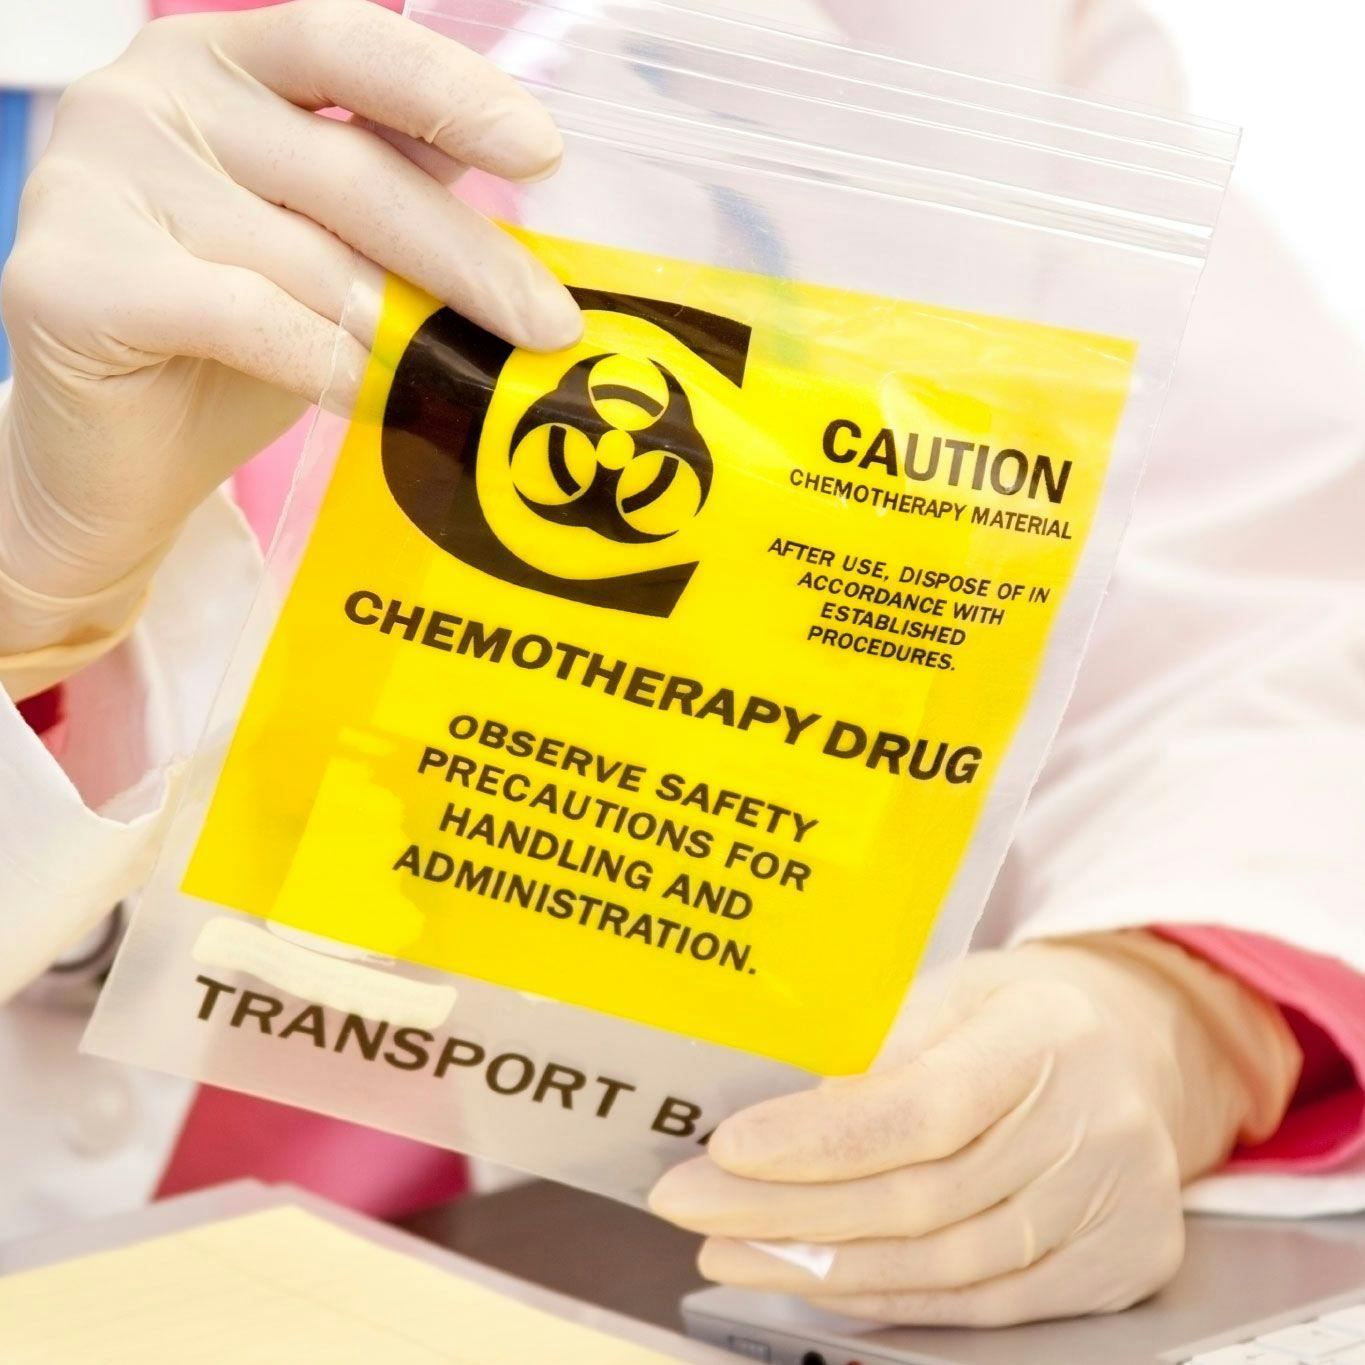 Chemo Use Does Not Improve Quality of Life Near Death